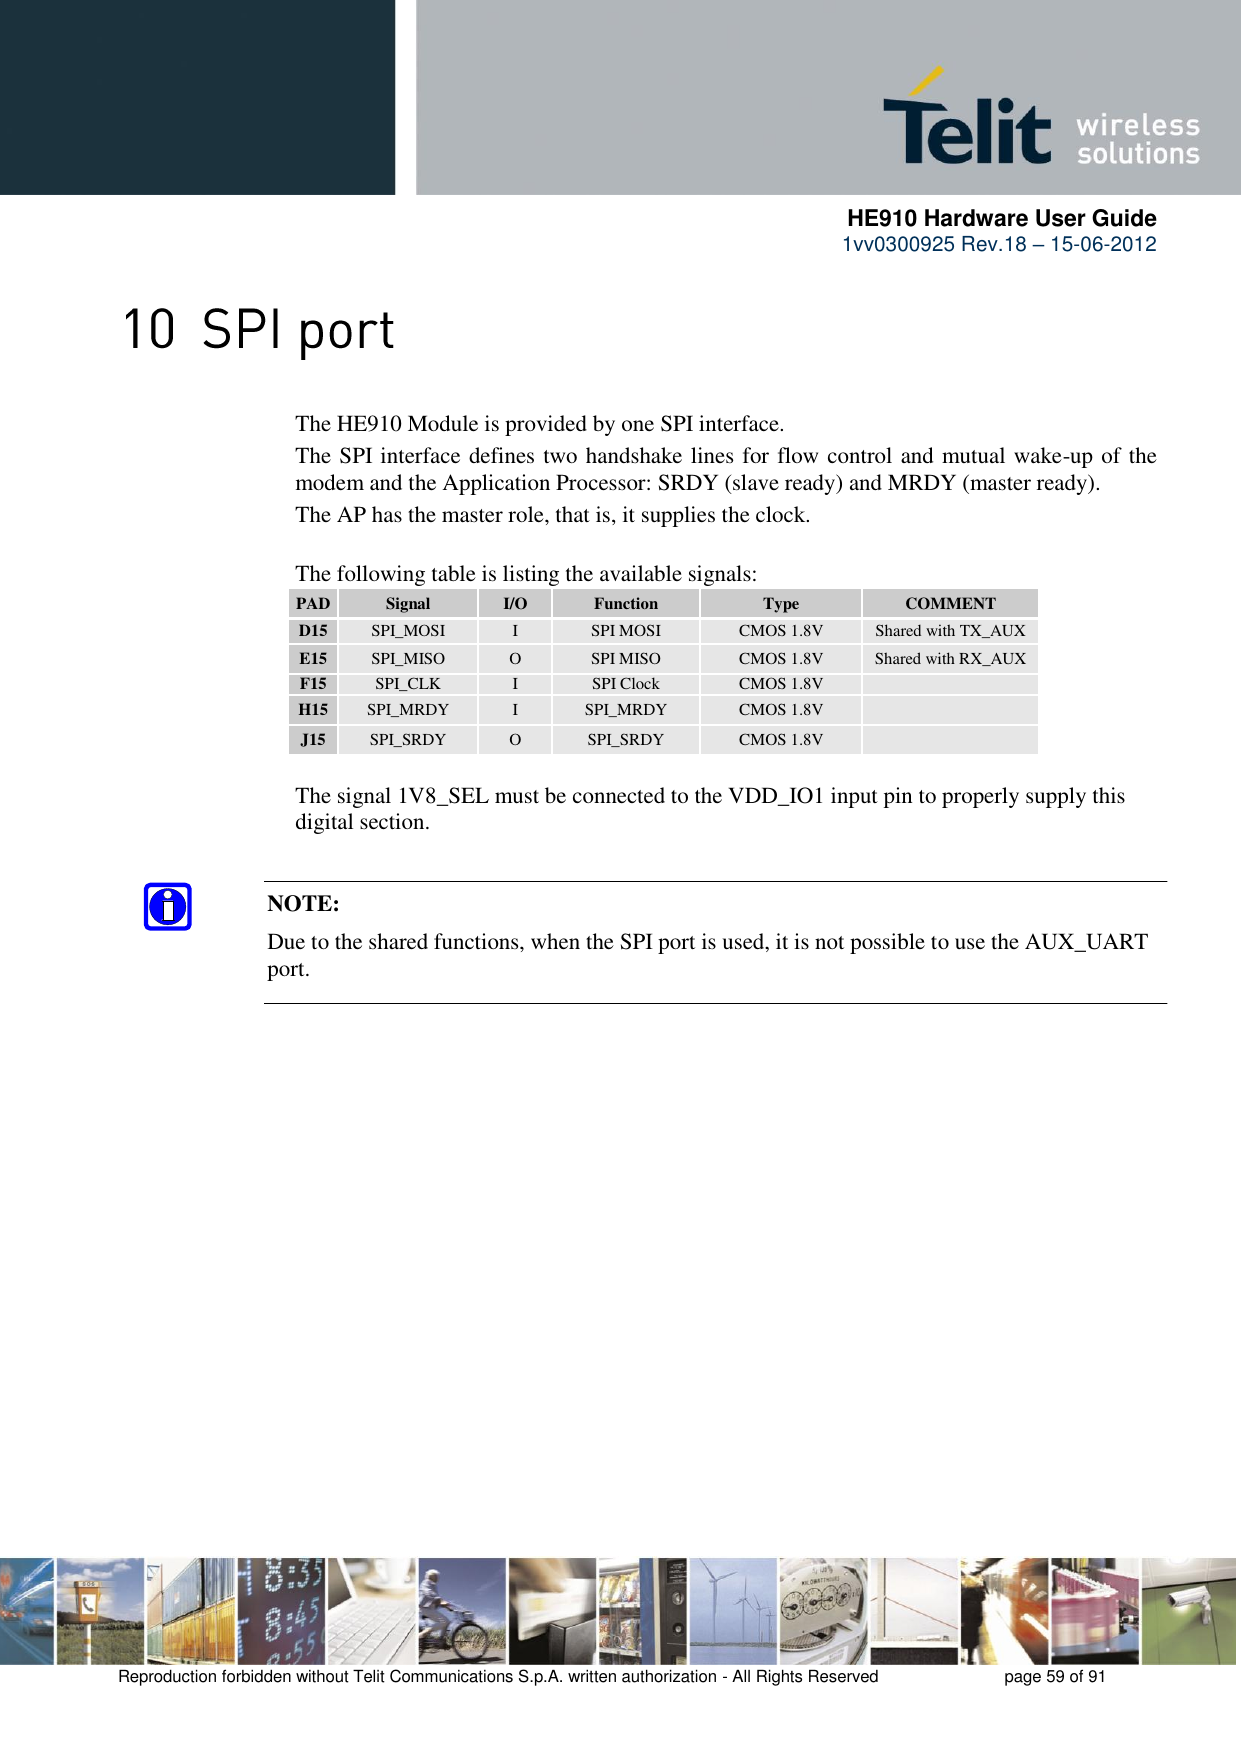      HE910 Hardware User Guide 1vv0300925 Rev.18 – 15-06-2012    Reproduction forbidden without Telit Communications S.p.A. written authorization - All Rights Reserved    page 59 of 91   The HE910 Module is provided by one SPI interface.       The SPI interface defines two handshake lines for flow control and mutual wake-up of the     modem and the Application Processor: SRDY (slave ready) and MRDY (master ready).     The AP has the master role, that is, it supplies the clock.      The following table is listing the available signals: PAD Signal I/O Function Type COMMENT D15 SPI_MOSI I SPI MOSI CMOS 1.8V Shared with TX_AUX E15 SPI_MISO O SPI MISO CMOS 1.8V Shared with RX_AUX F15 SPI_CLK I SPI Clock CMOS 1.8V  H15 SPI_MRDY I SPI_MRDY CMOS 1.8V  J15 SPI_SRDY O SPI_SRDY CMOS 1.8V     The signal 1V8_SEL must be connected to the VDD_IO1 input pin to properly supply this   digital section.   NOTE:  Due to the shared functions, when the SPI port is used, it is not possible to use the AUX_UART port. 